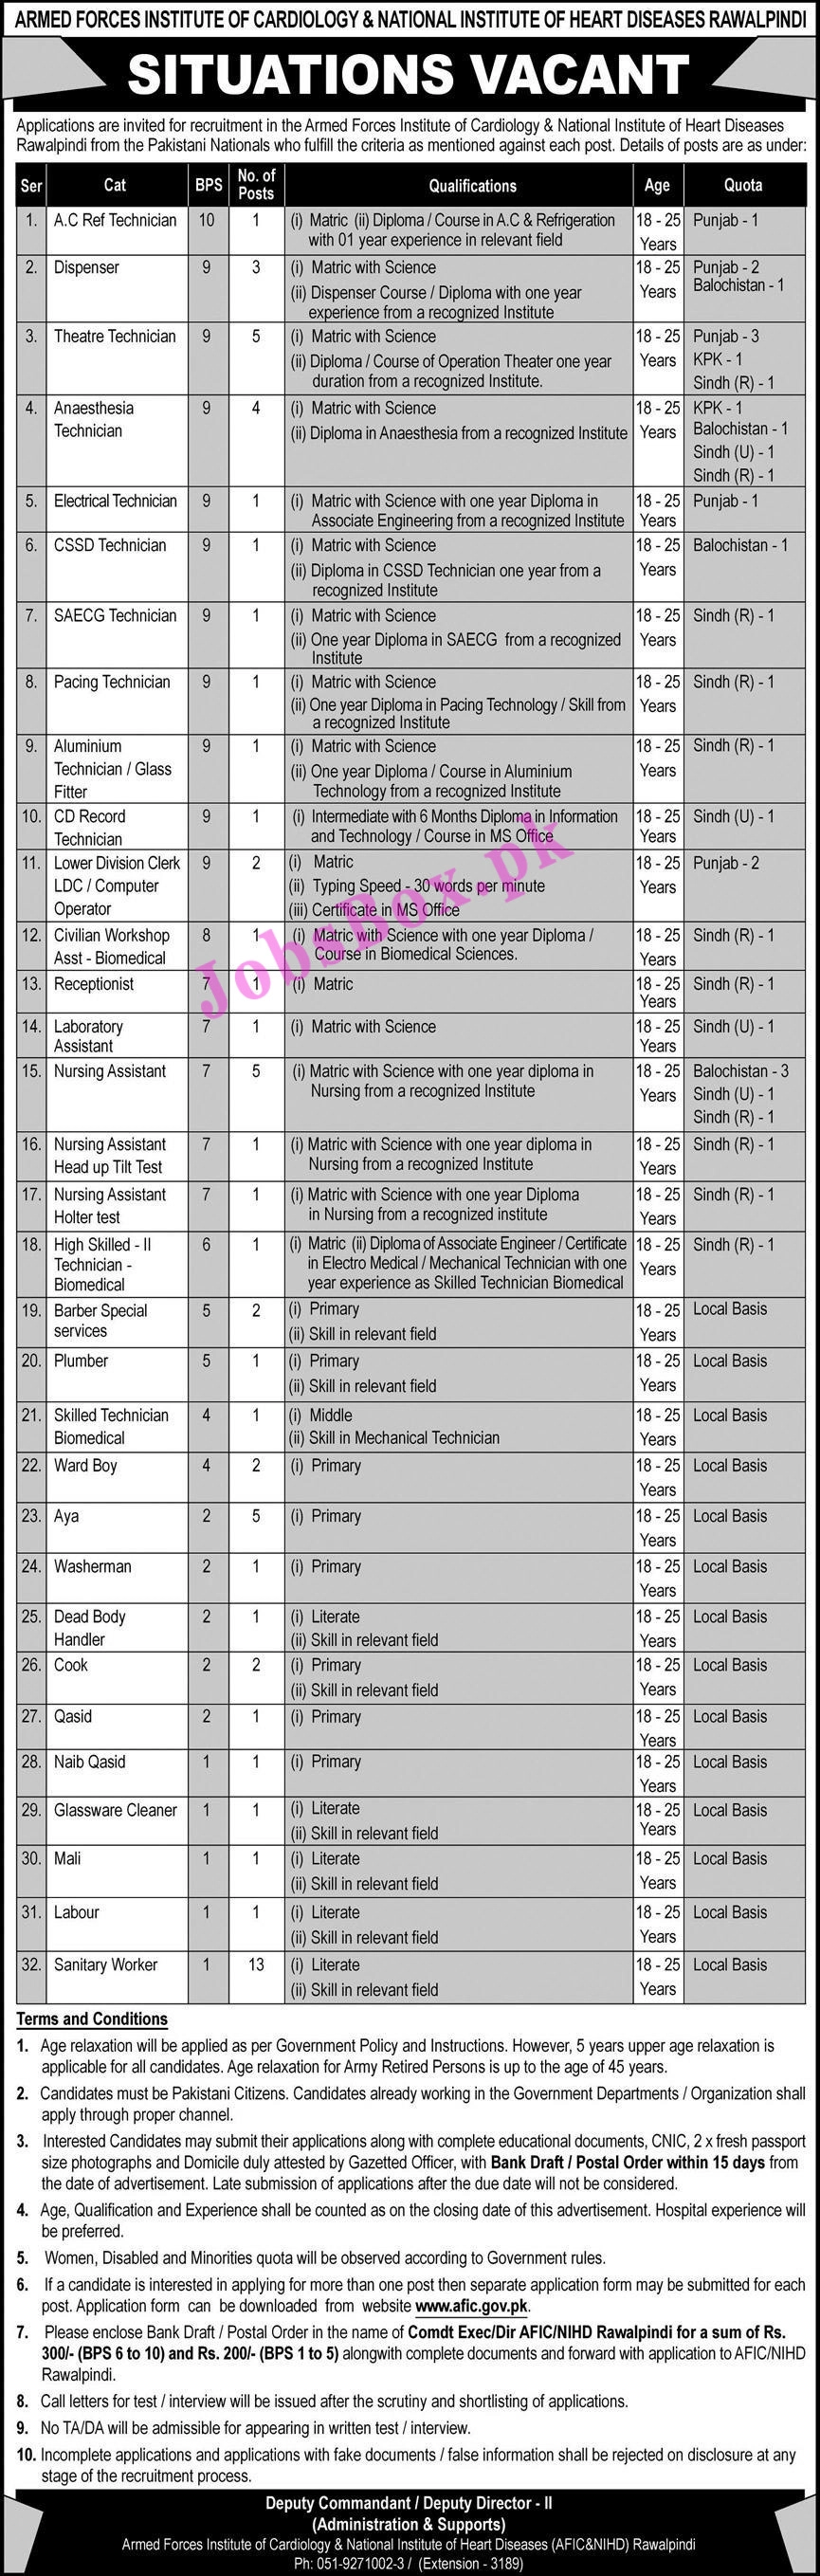 Armed Forces Institute of Cardiology Jobs 2021 - AFIC-NIHD Jobs 2021